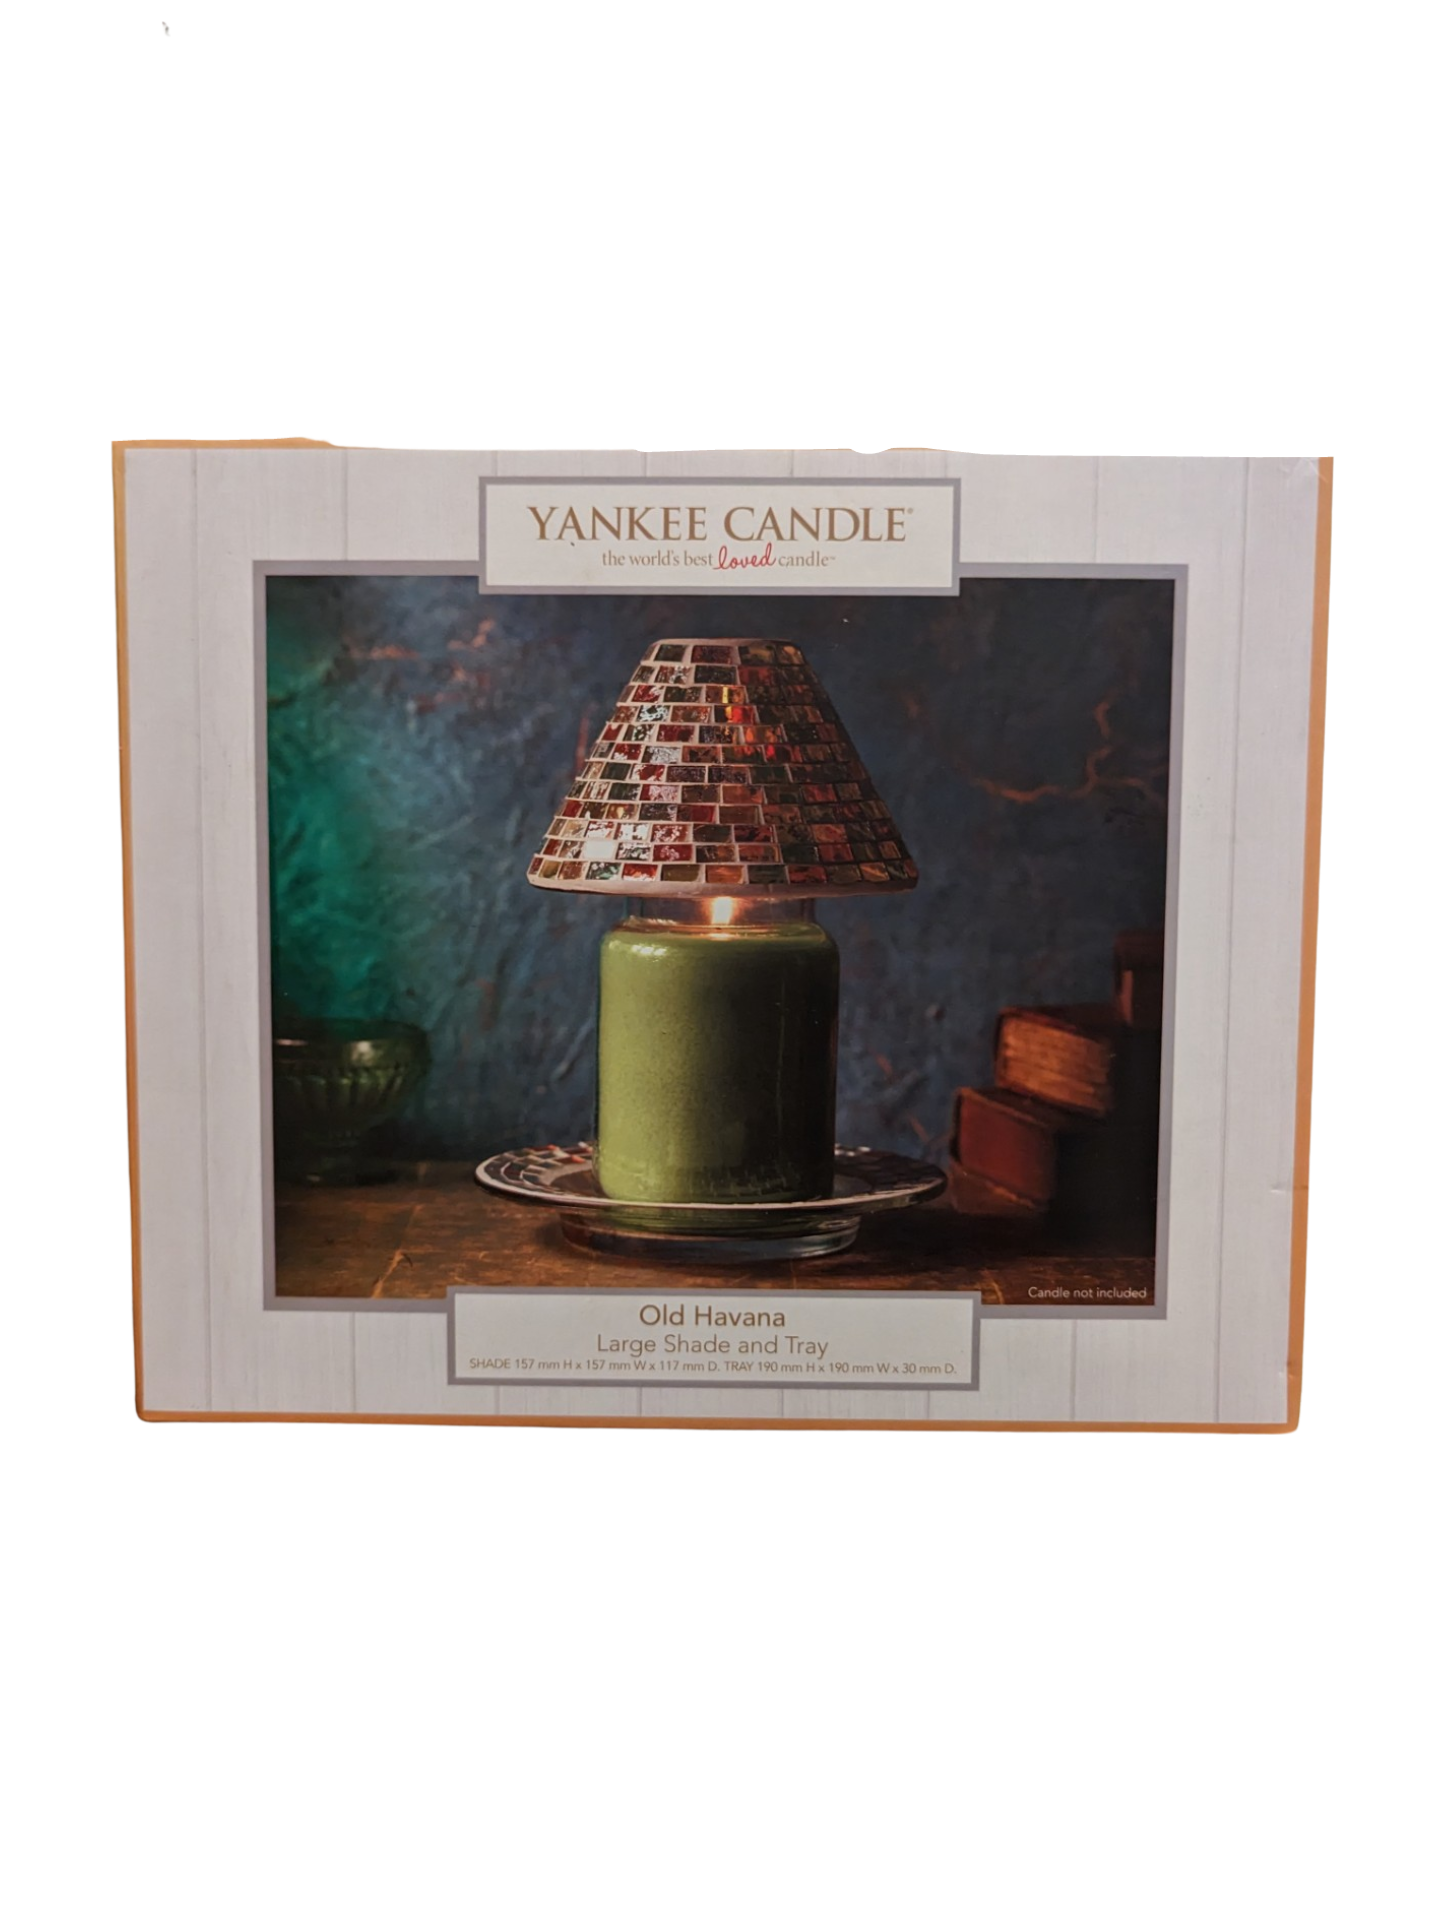 yankee candle whole home air freshener in car｜TikTok Search